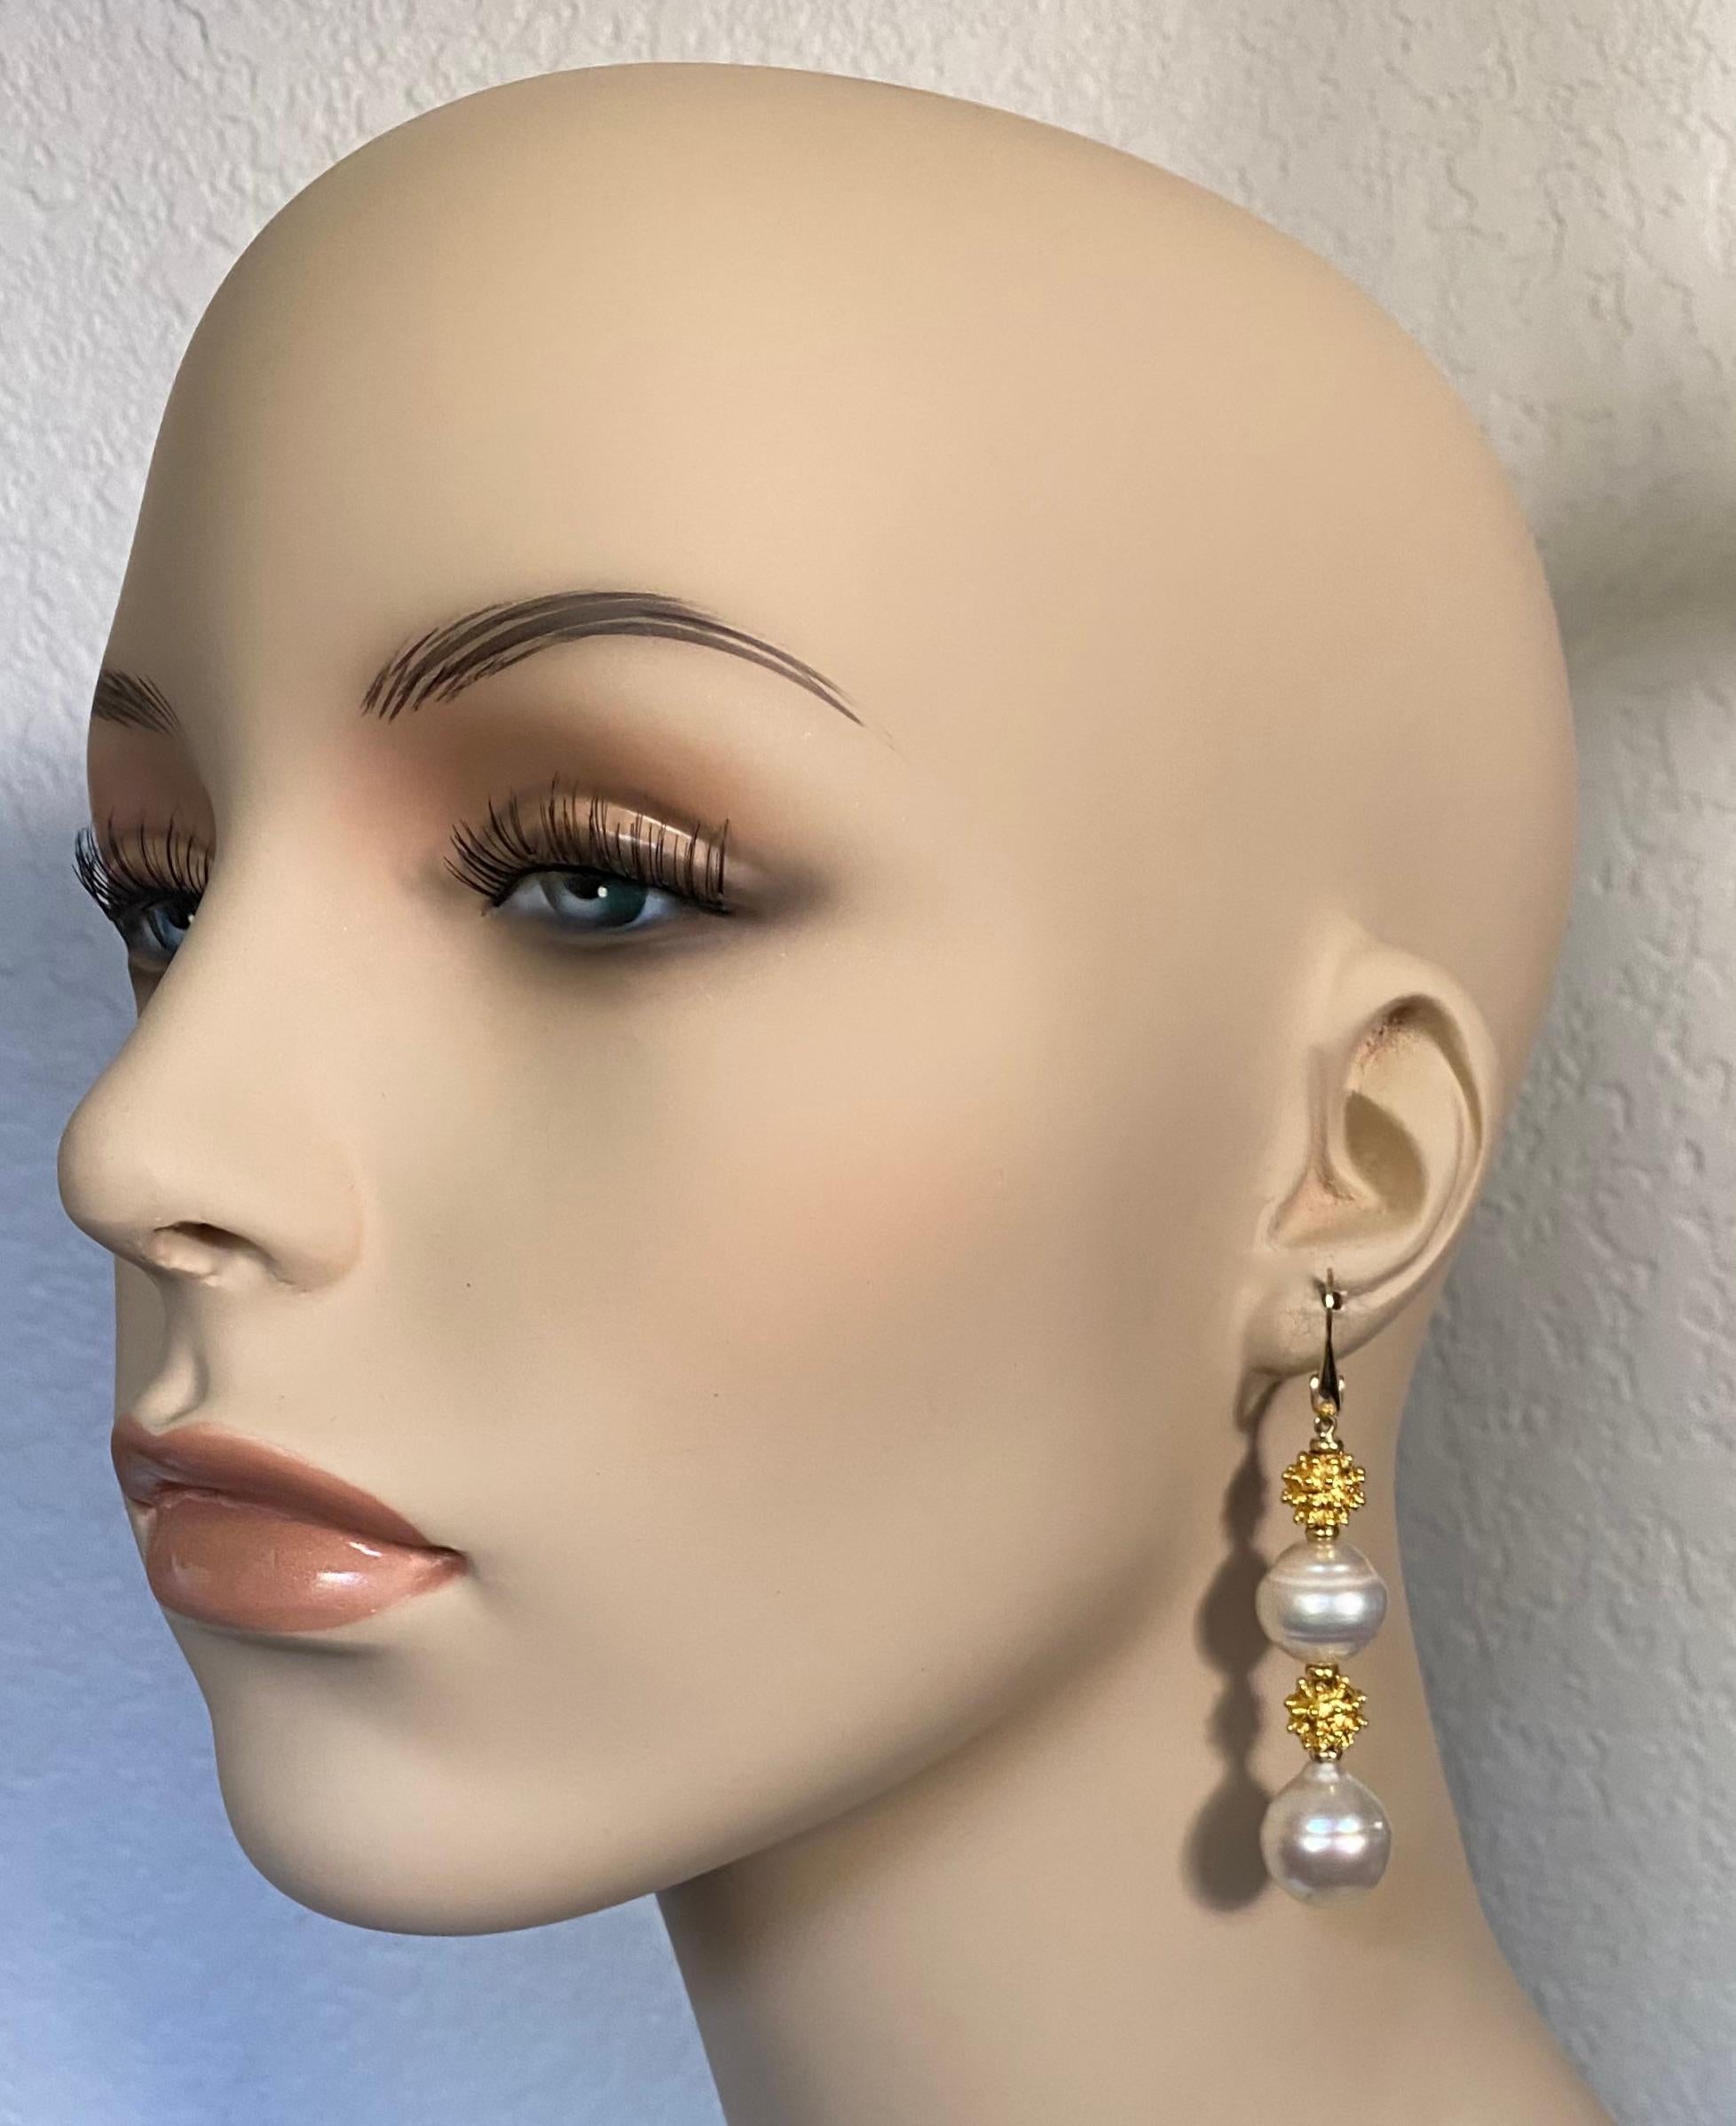 Baroque South Seas pearls are paired with granulated beads in these daring dangle earrings.  The pearls are bright white with irregularities typically found in baroque pearls of all types.  The pearls are complimented by 10mm granulated vermeil